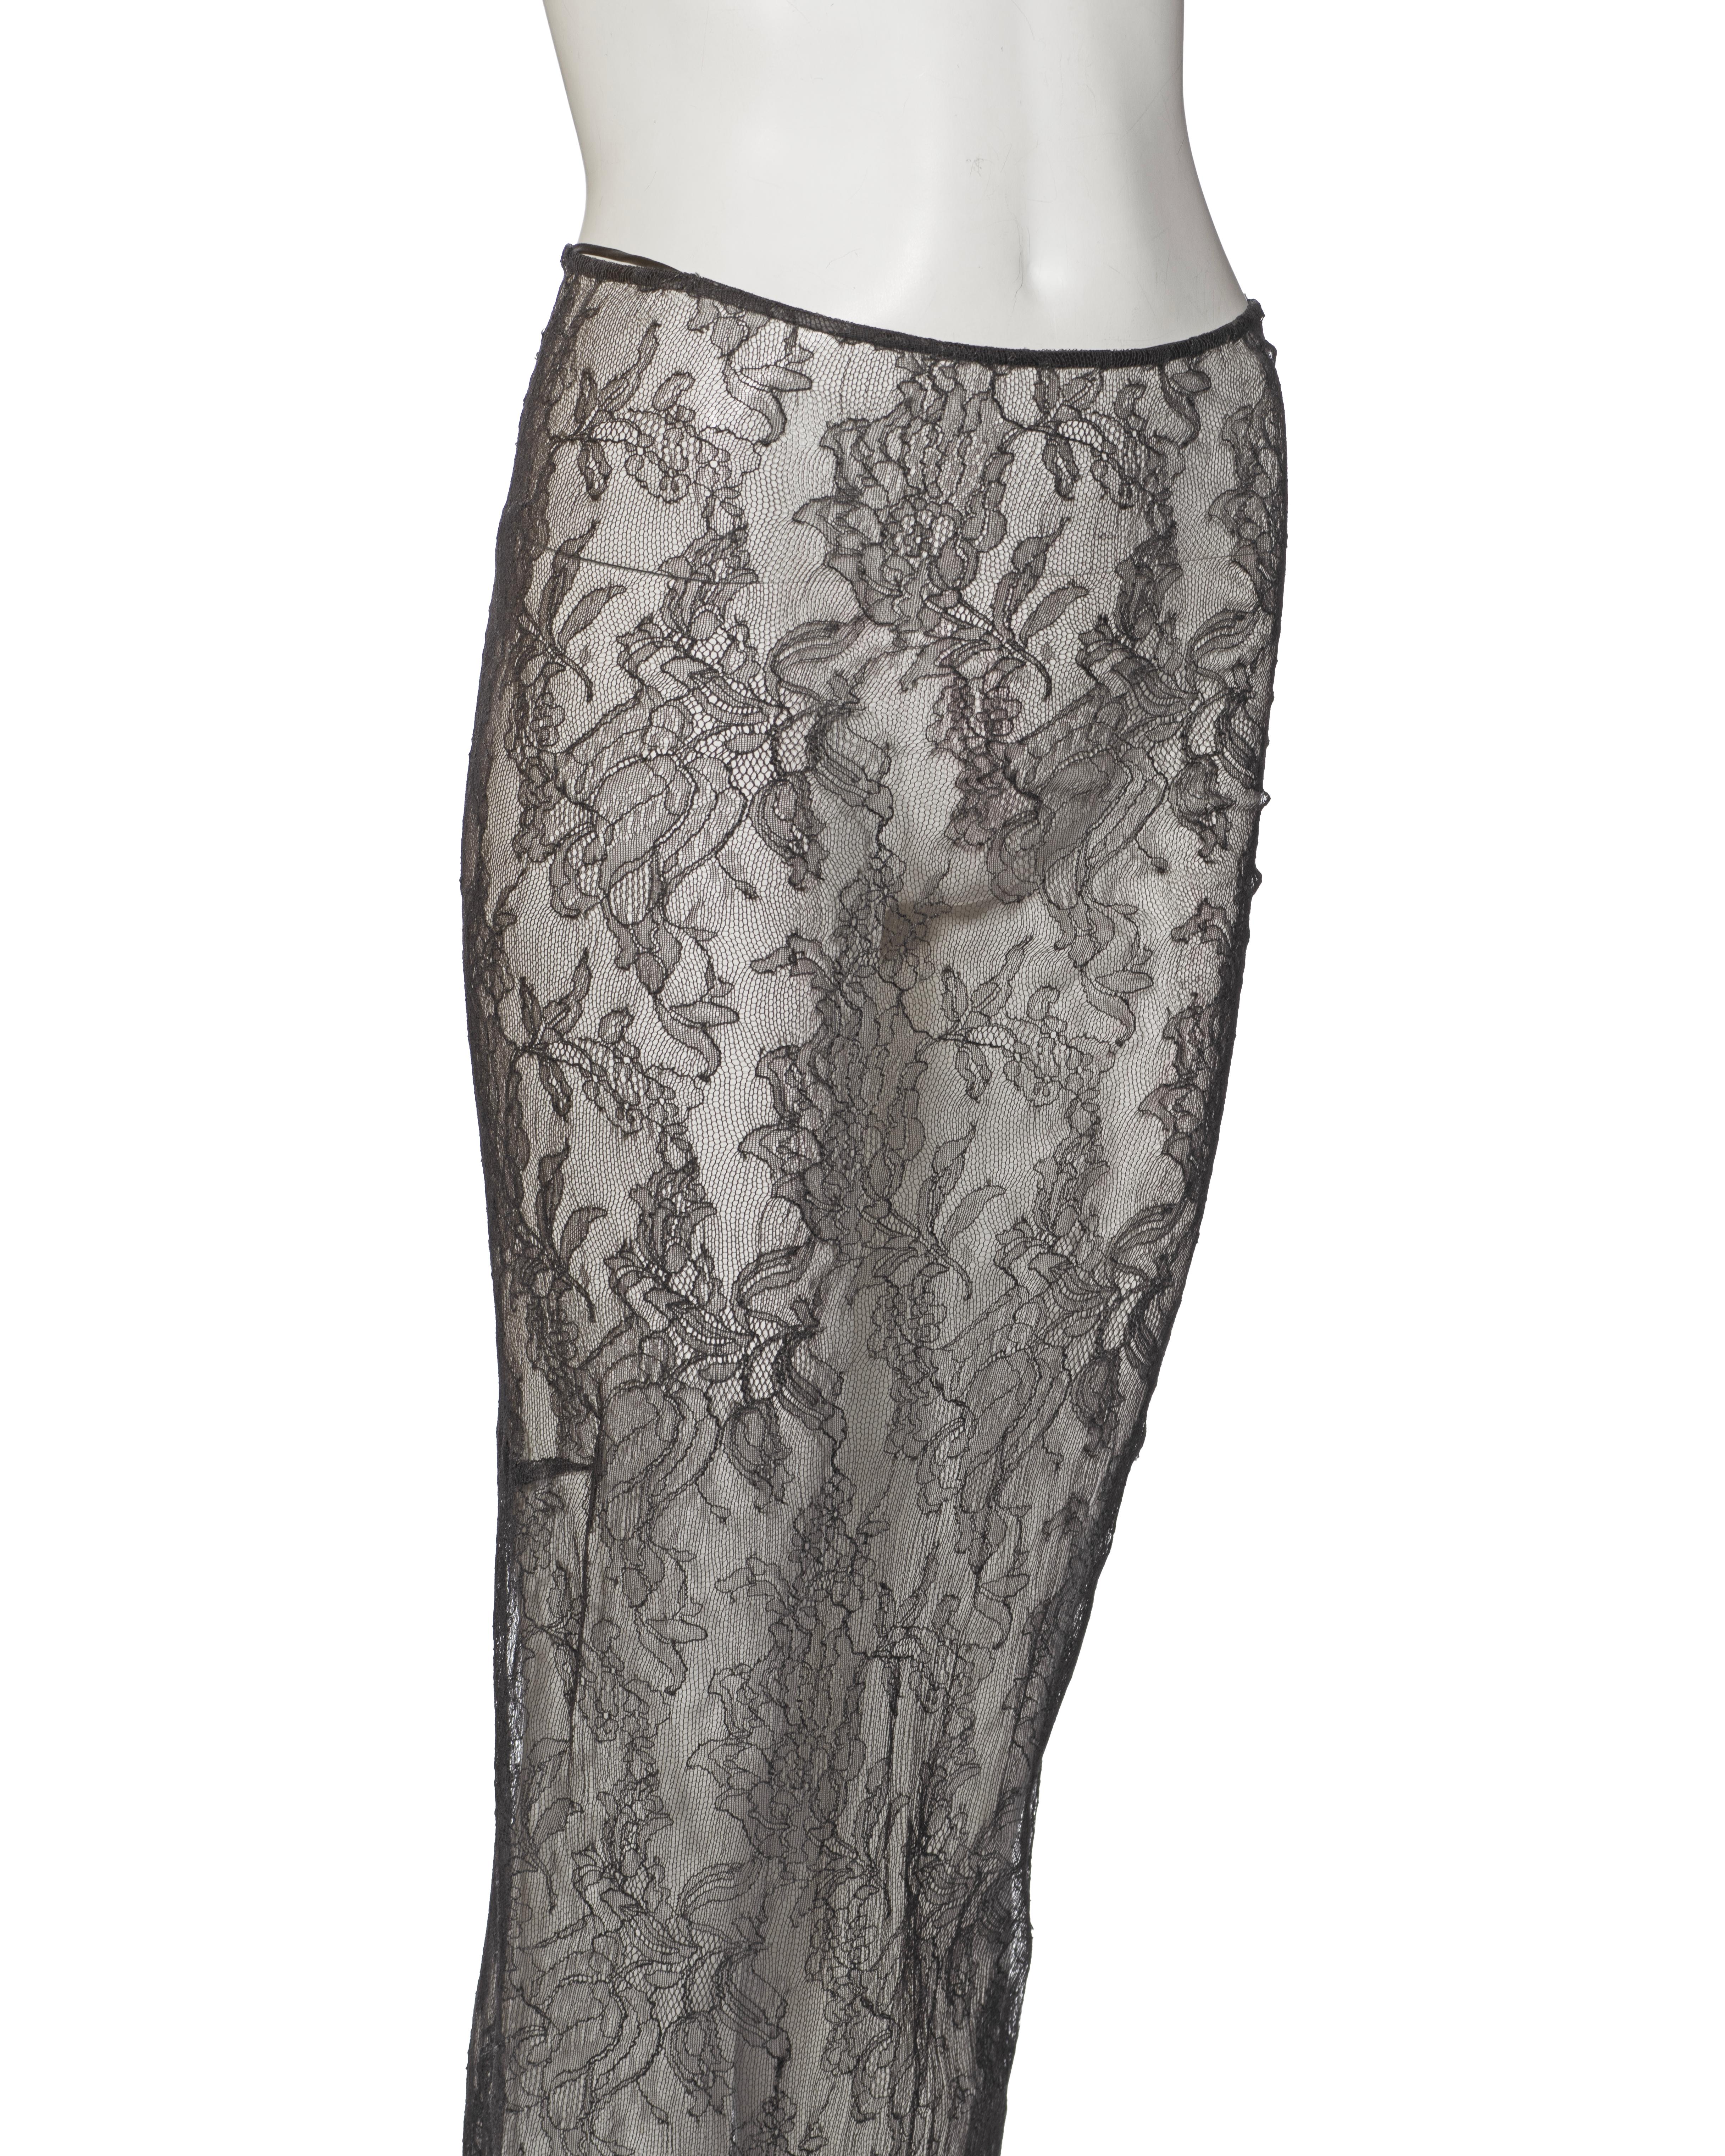 Dolce & Gabbana Grey Floral Lace Skirt with Train, ss 1999 2